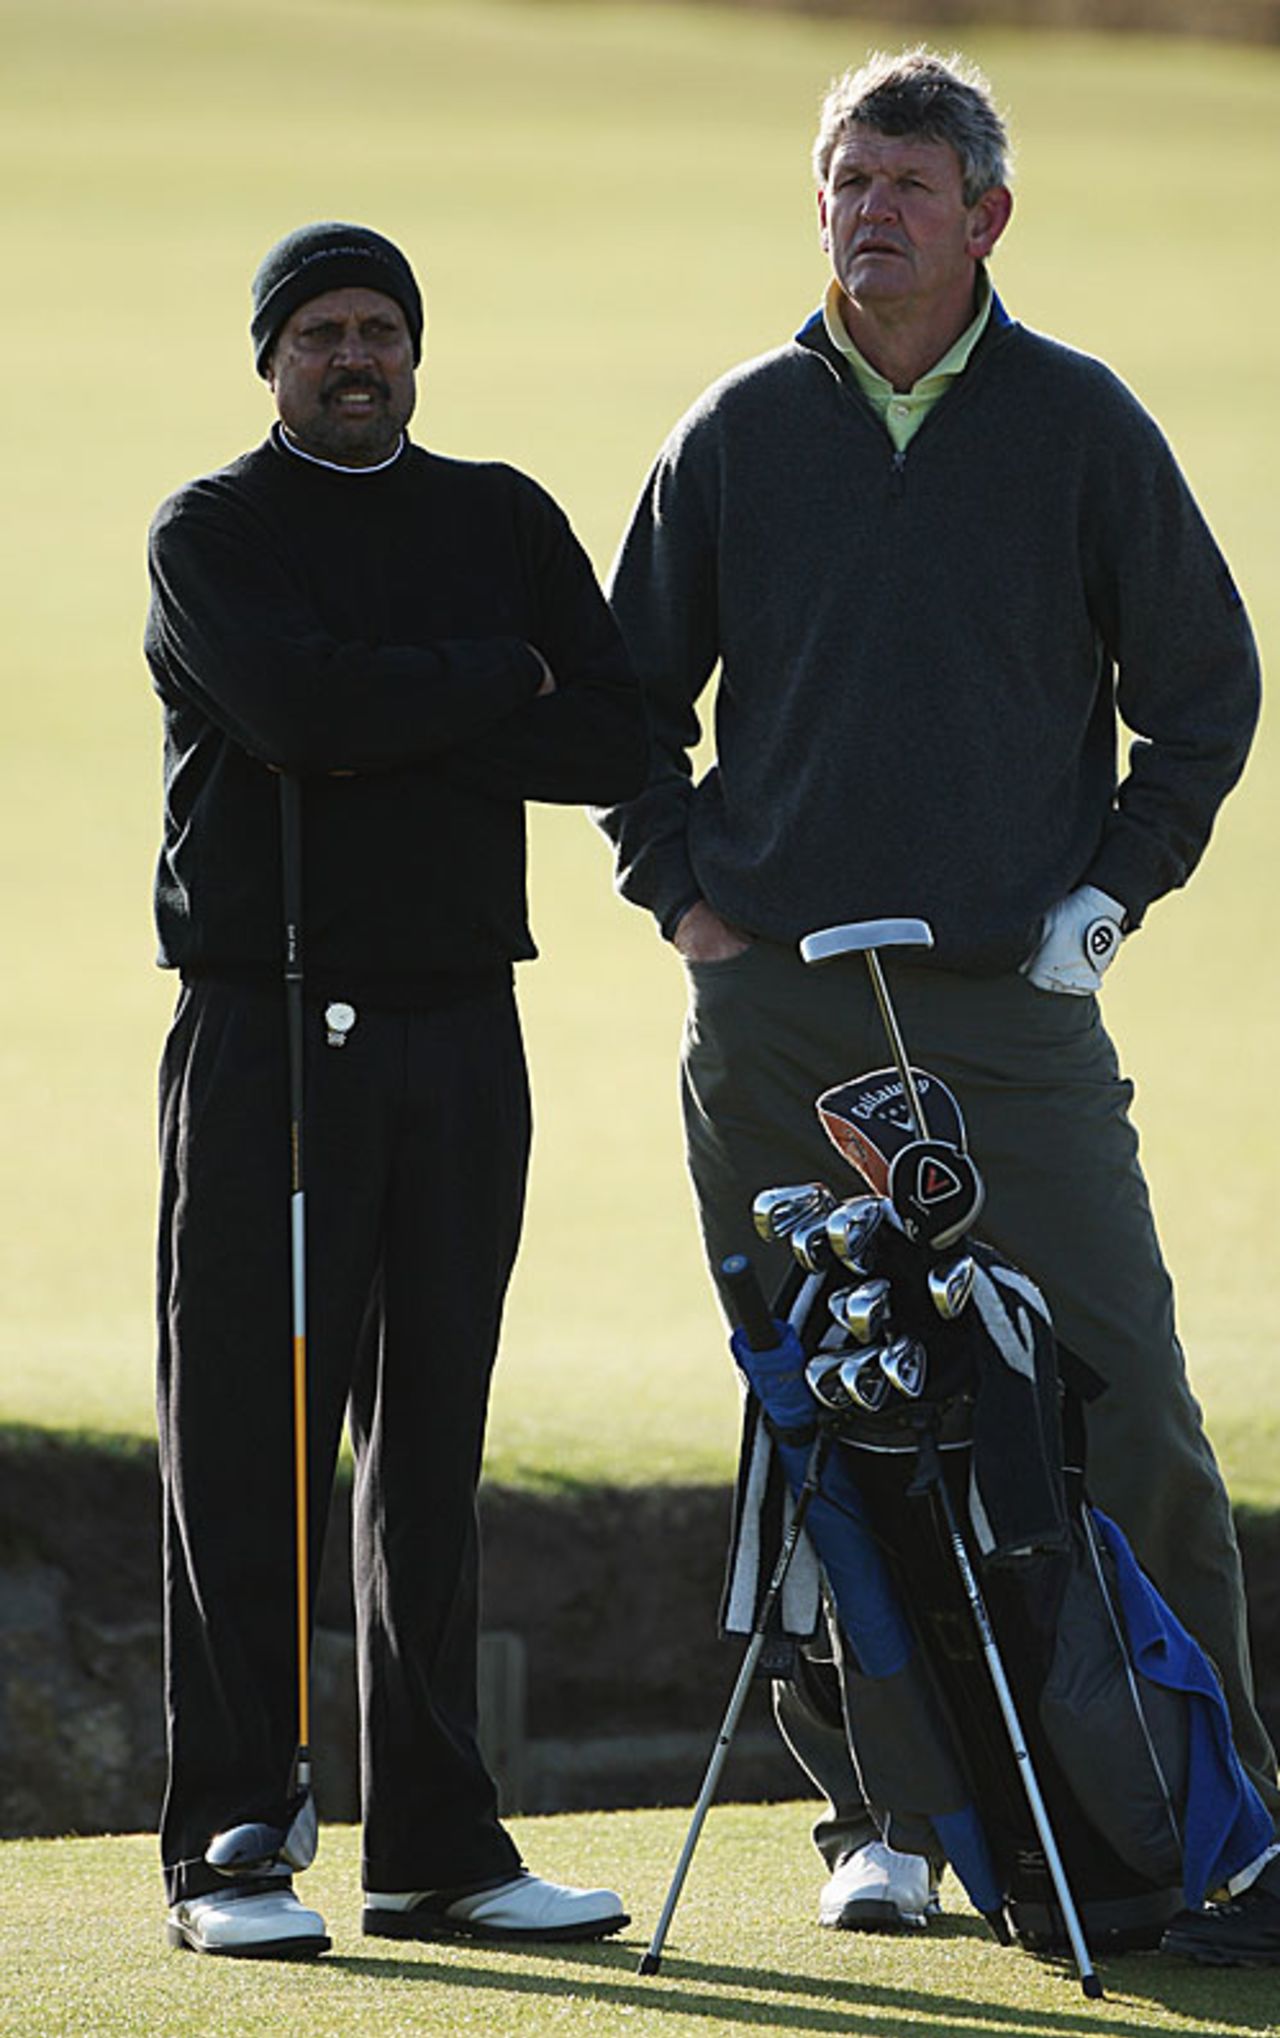 Kapil Dev and South African rugby legend Morne Du Plessis at the Alfred Dunhill Links Championship in St. Andrews, Scotland, October 2, 2008